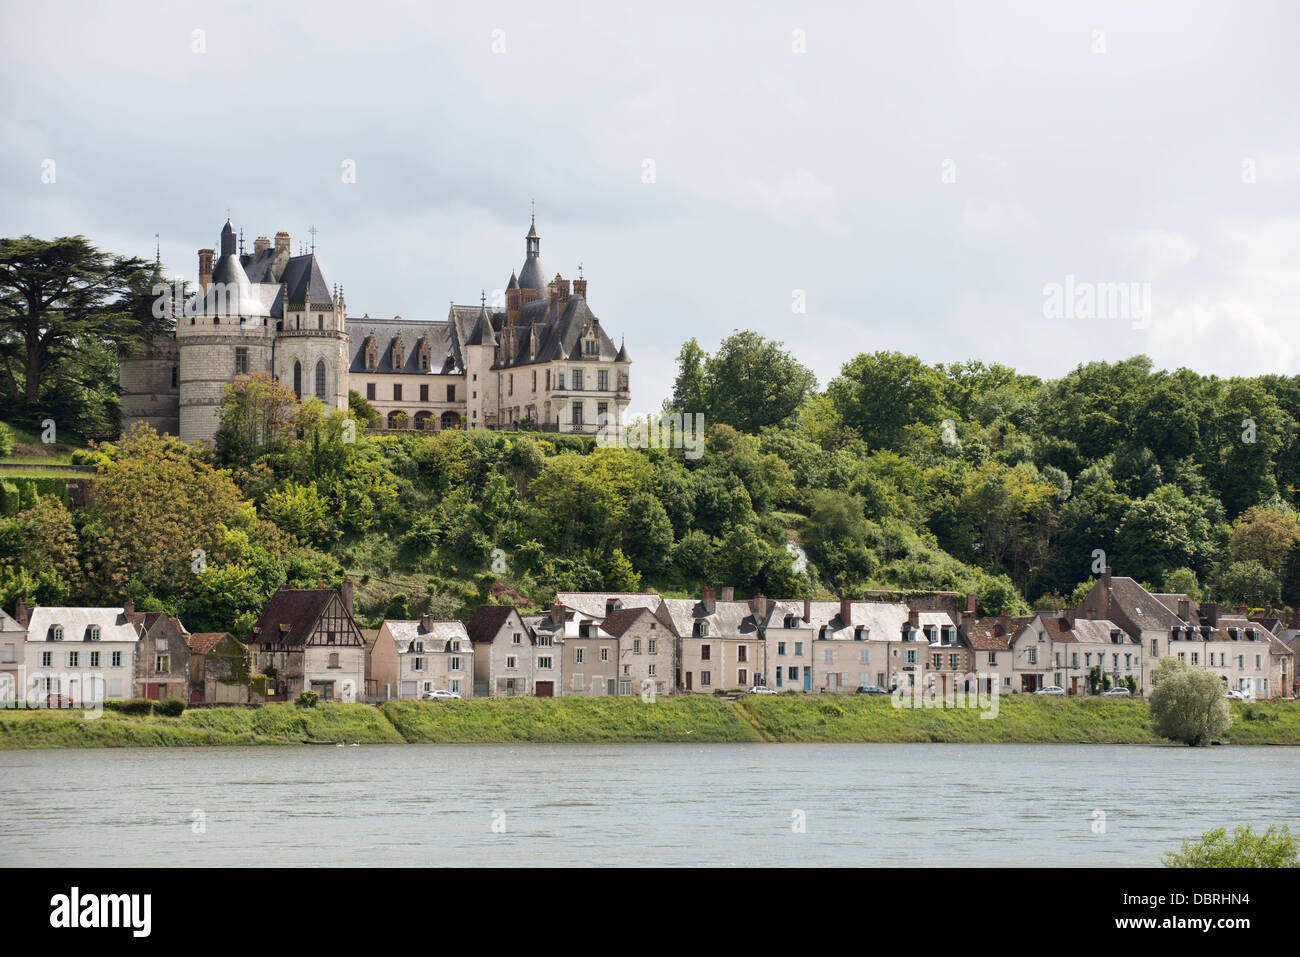 A view of the historic French Château Chaumont with the towns cottages nestled beneath from across the river Loire, France Stock Photo